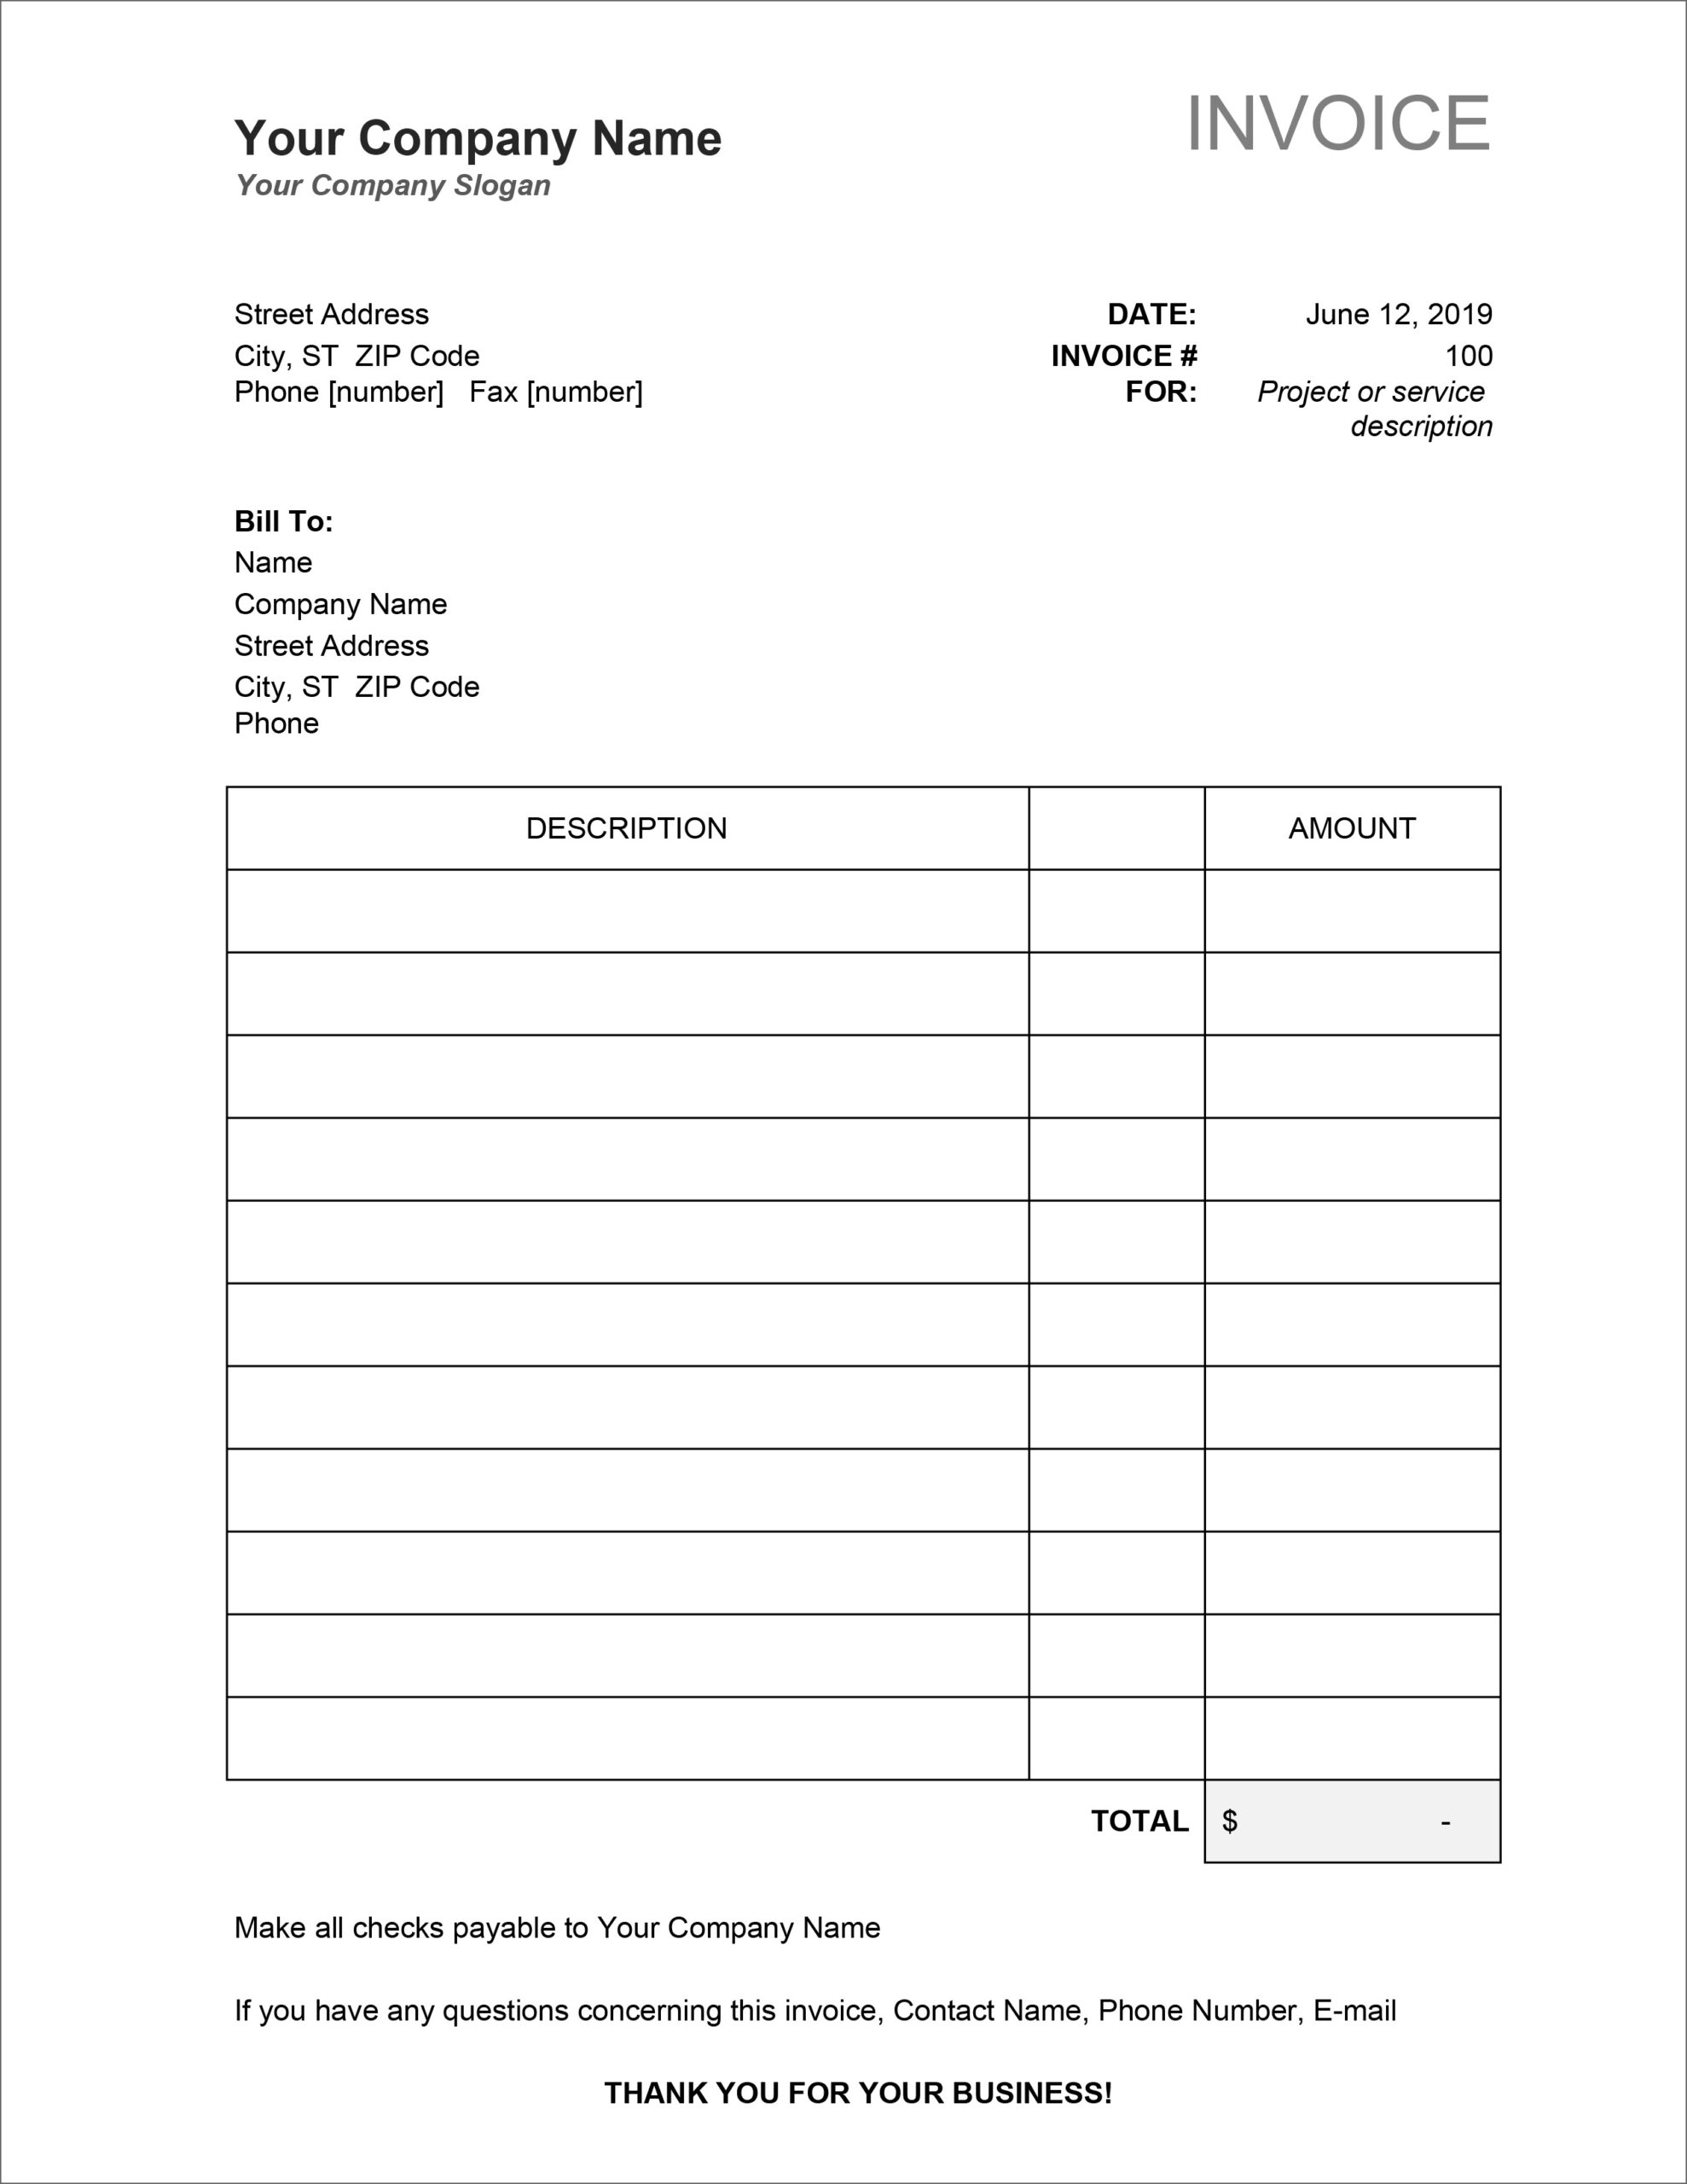 32 Free Invoice Templates In Microsoft Excel And Docx Formats With Regard To Microsoft Invoices Templates Free